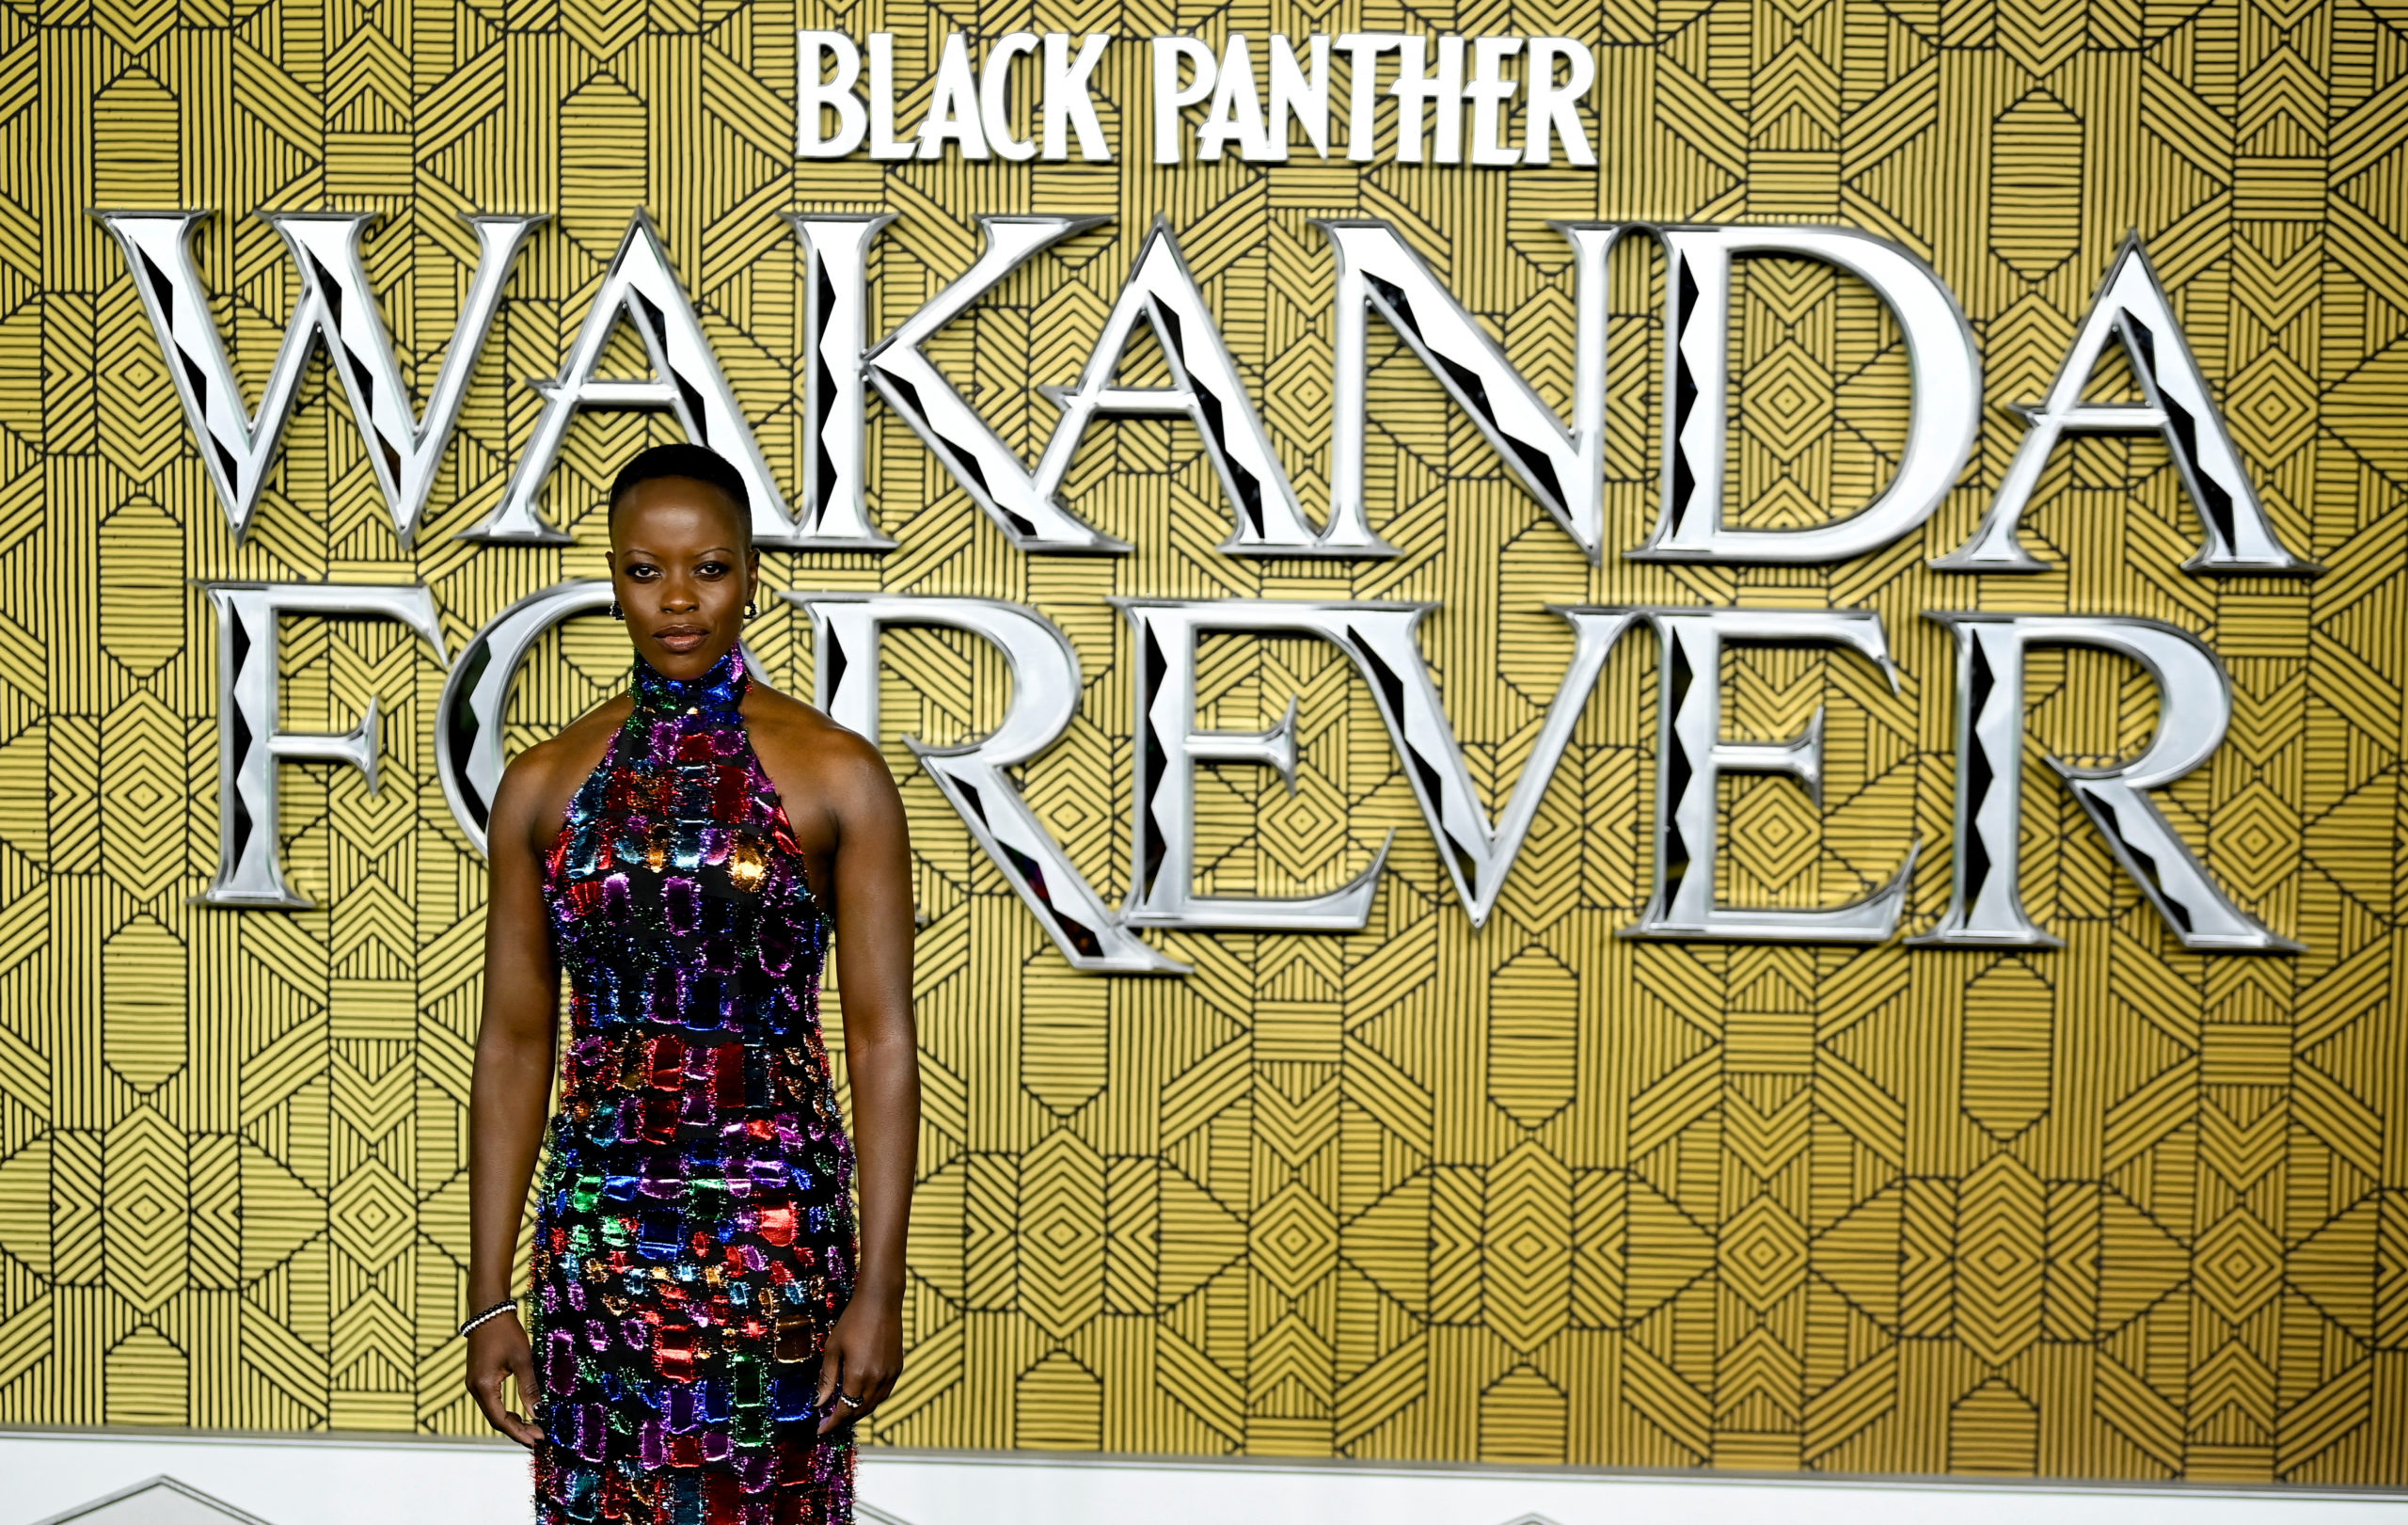 Cast member Florence Kasumba attends the premiere of "Black Panther: Wakanda Forever", in London, Britain November 3, 2022. REUTERS/Toby Melville/File Photo